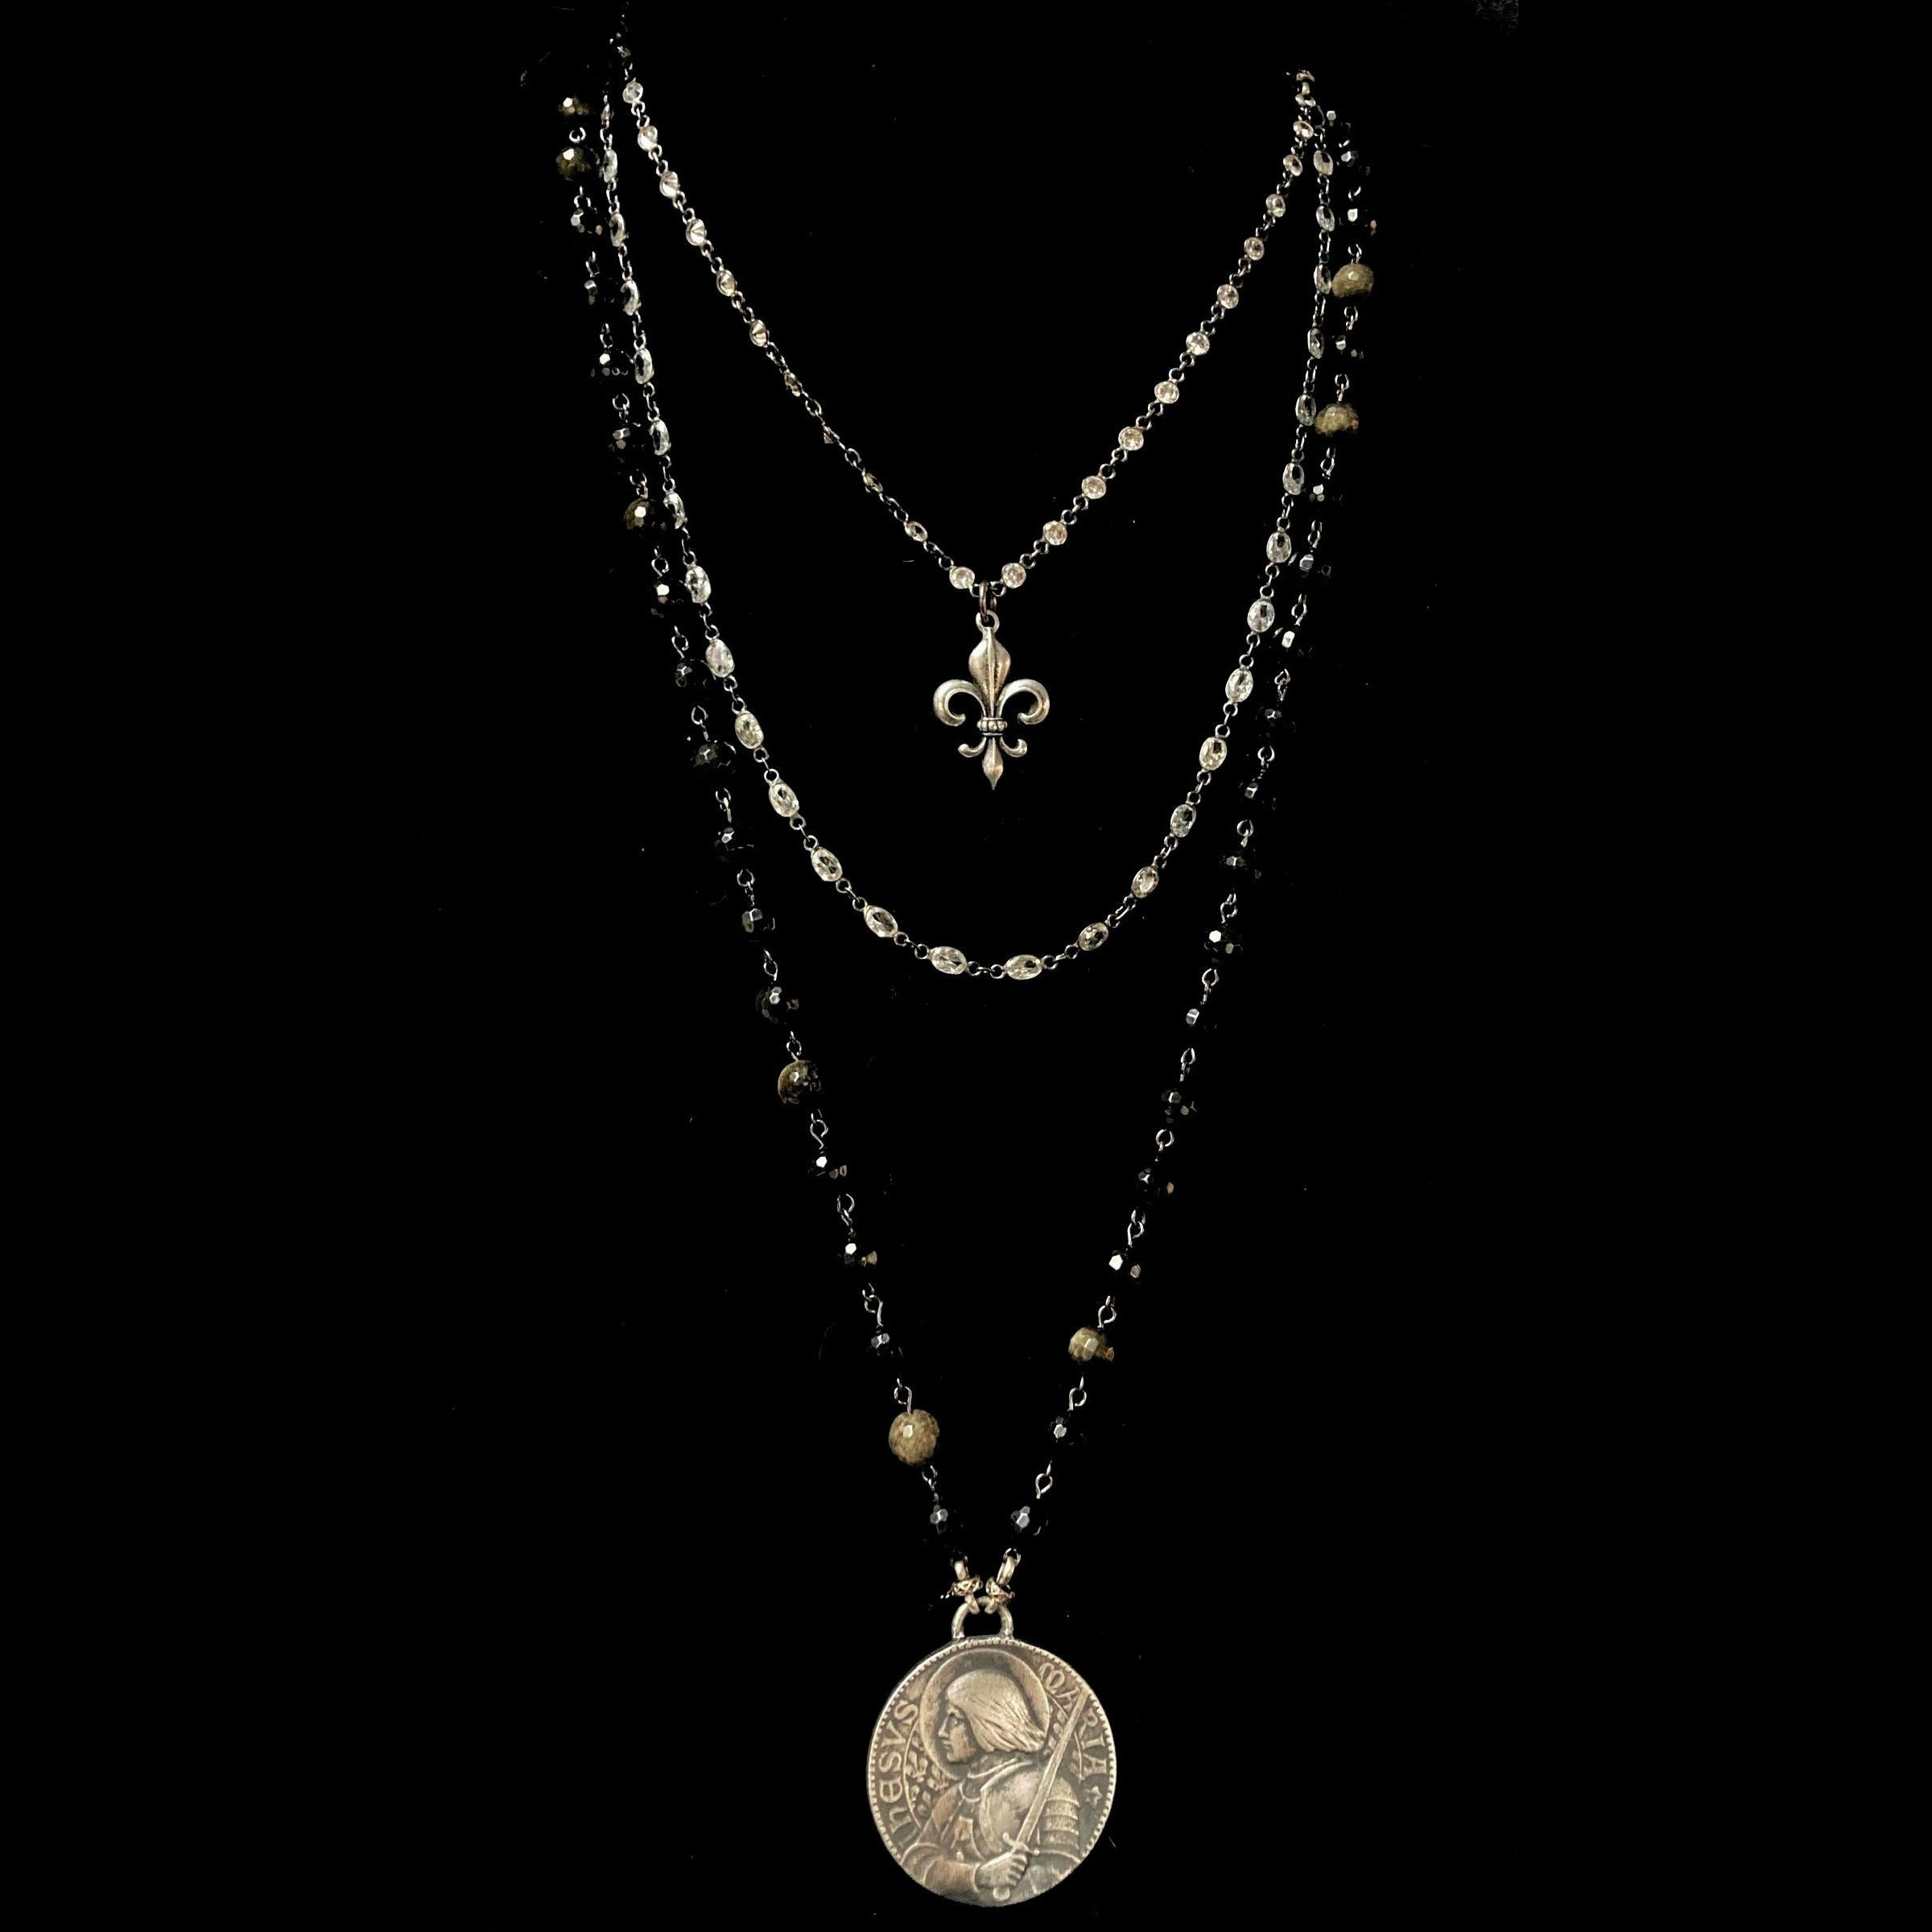  Saint Joan Of Arc Necklace, Maid Of Orleans Gift, St